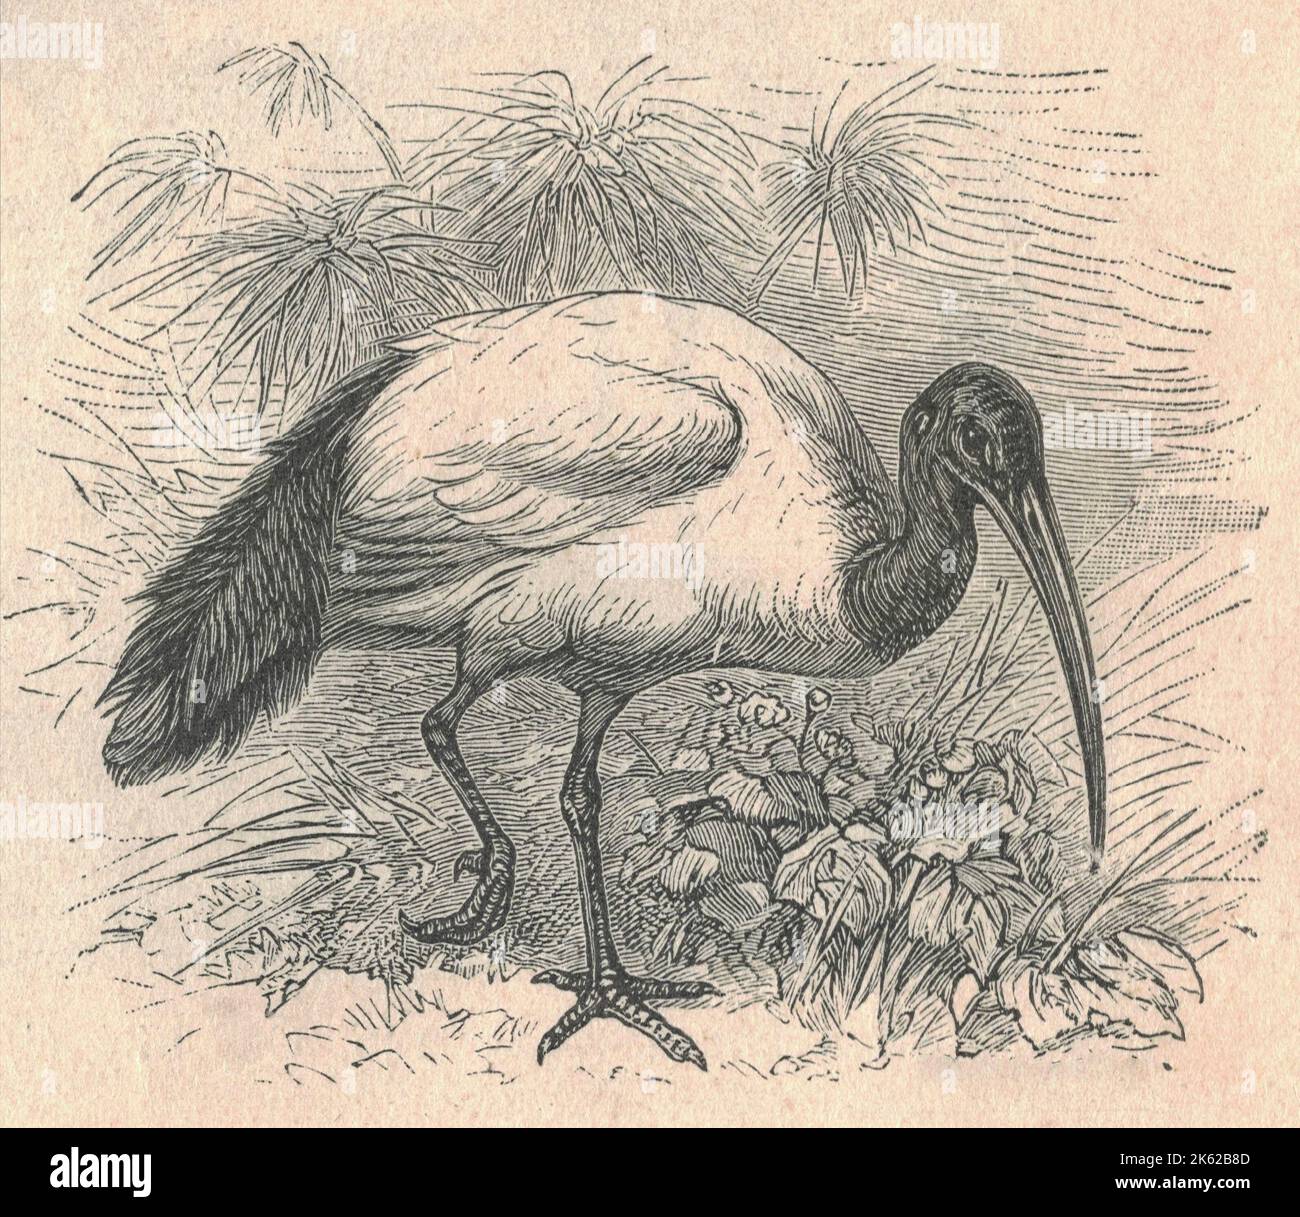 Antique engraved illustration of the ibis. Vintage illustration of the ibis. Old engraved picture of the bird. The ibises  are a group of long-legged wading birds in the family Threskiornithidae, that inhabit wetlands, forests and plains.'Ibis' derives from the Latin and Ancient Greek word for this group of birds. It also occurs in the scientific name of the cattle egret (Bubulcus ibis) mistakenly identified in 1757 as being the sacred ibis. Stock Photo